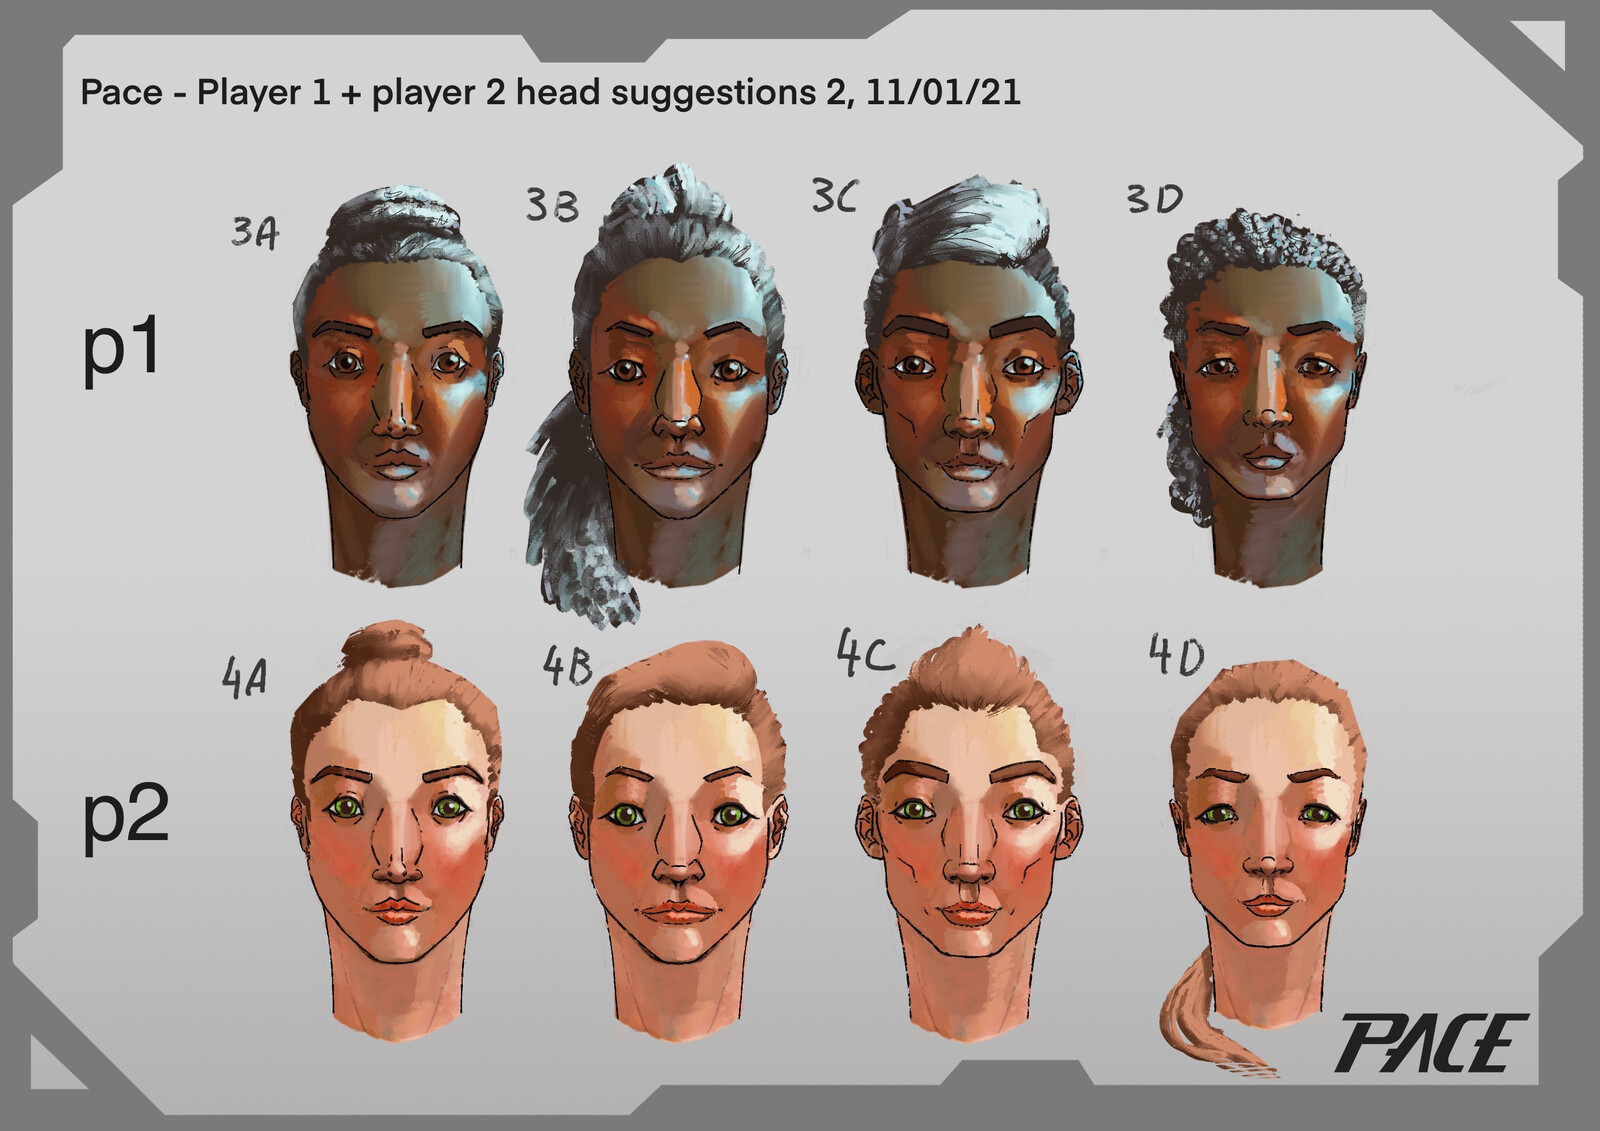 Female versions of the character portraits, attempting to push for more diversity.